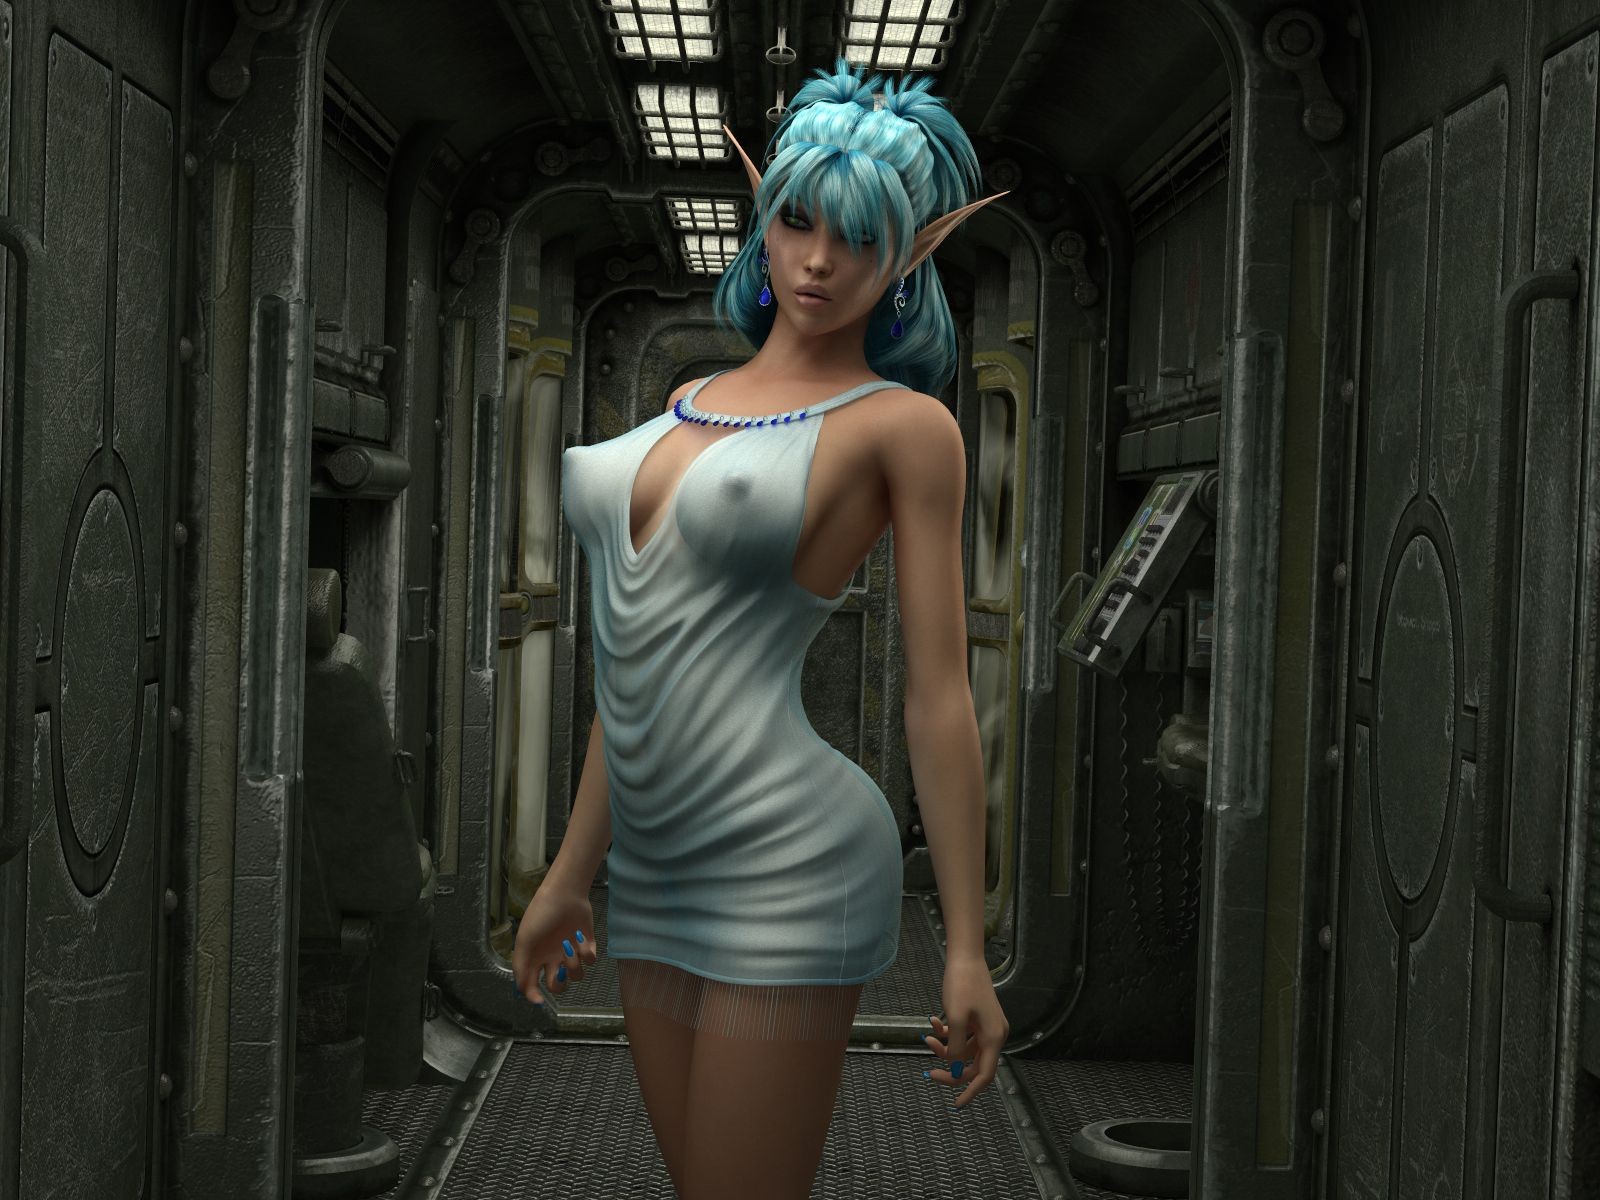 3d Elf Fuck - Pretty 3d teen elf with blue hairs hard fucked by a alien with huge cock  Porn Pictures, XXX Photos, Sex Images #2849824 - PICTOA